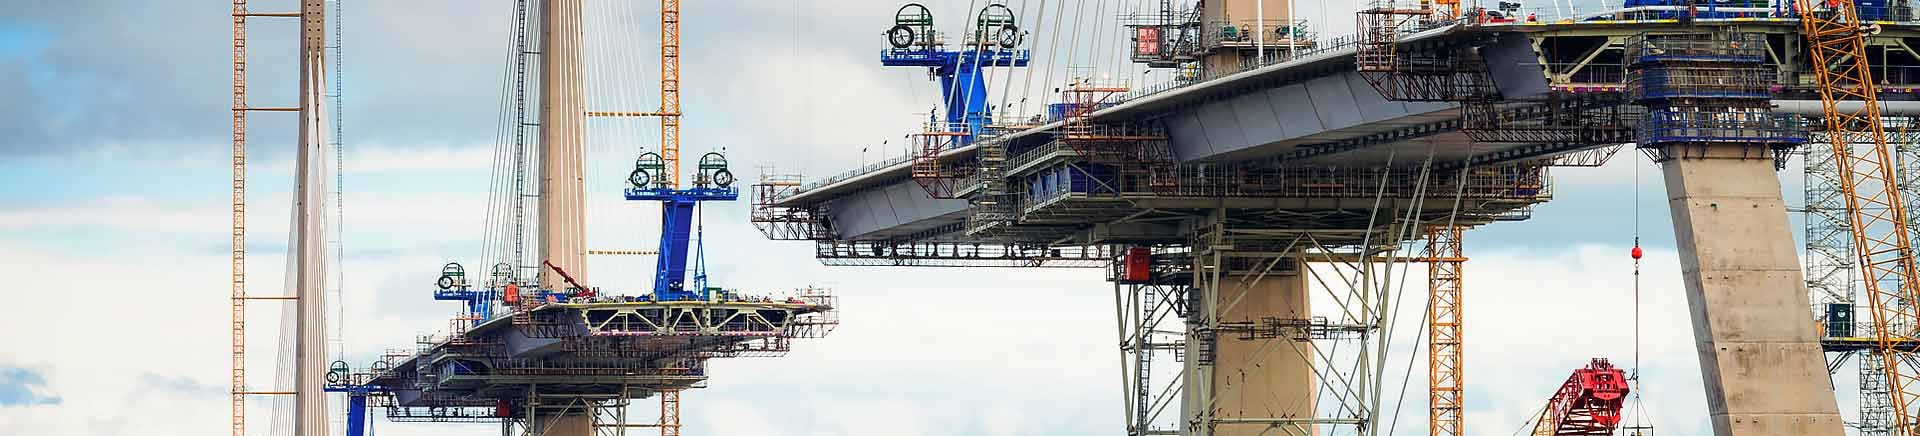 Rigging-and-Erection-Plan-Engineering-r2-1